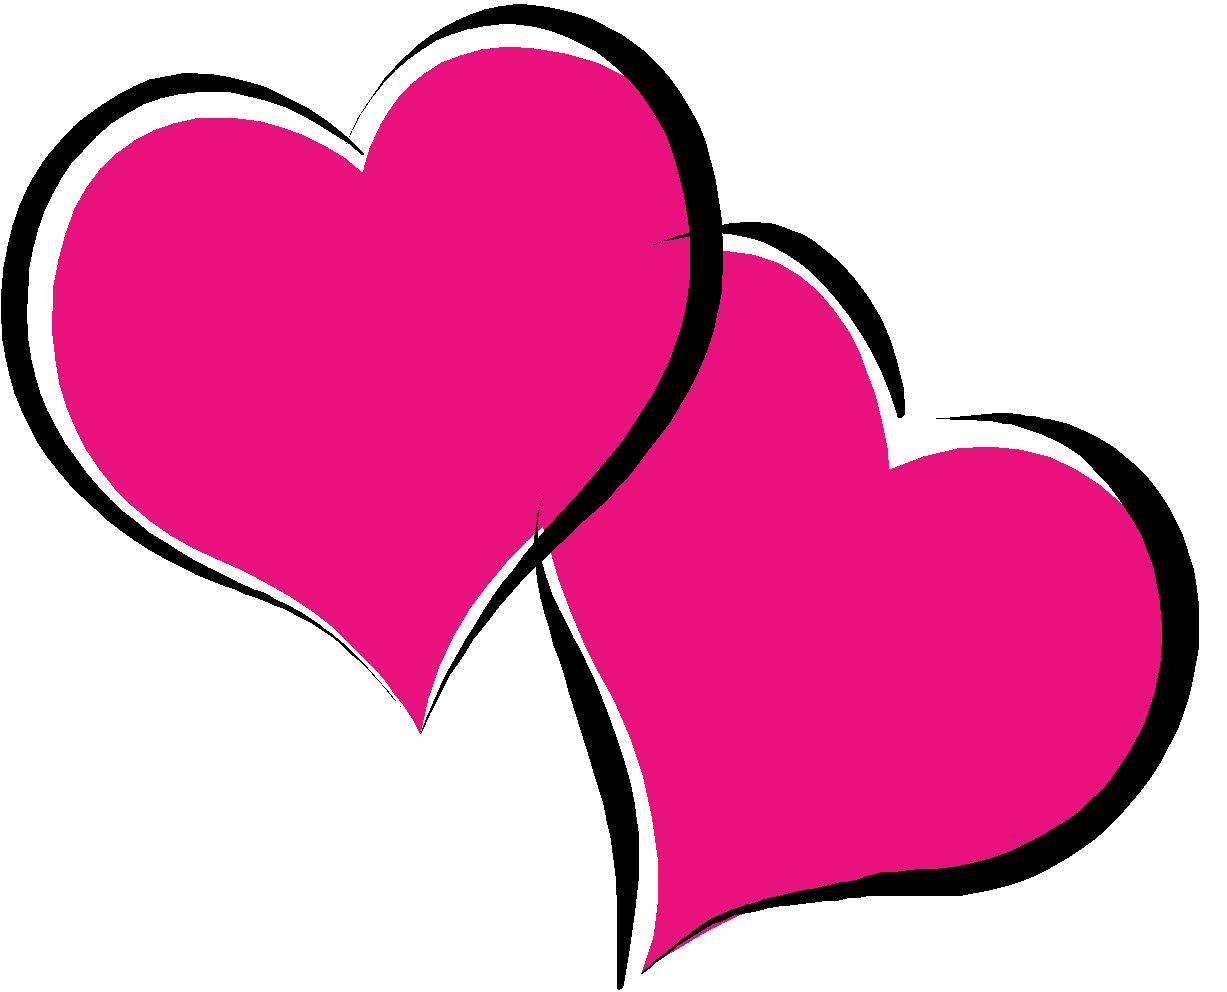 Heart Clip Art Microsoft | Clipart library - Free Clipart Images